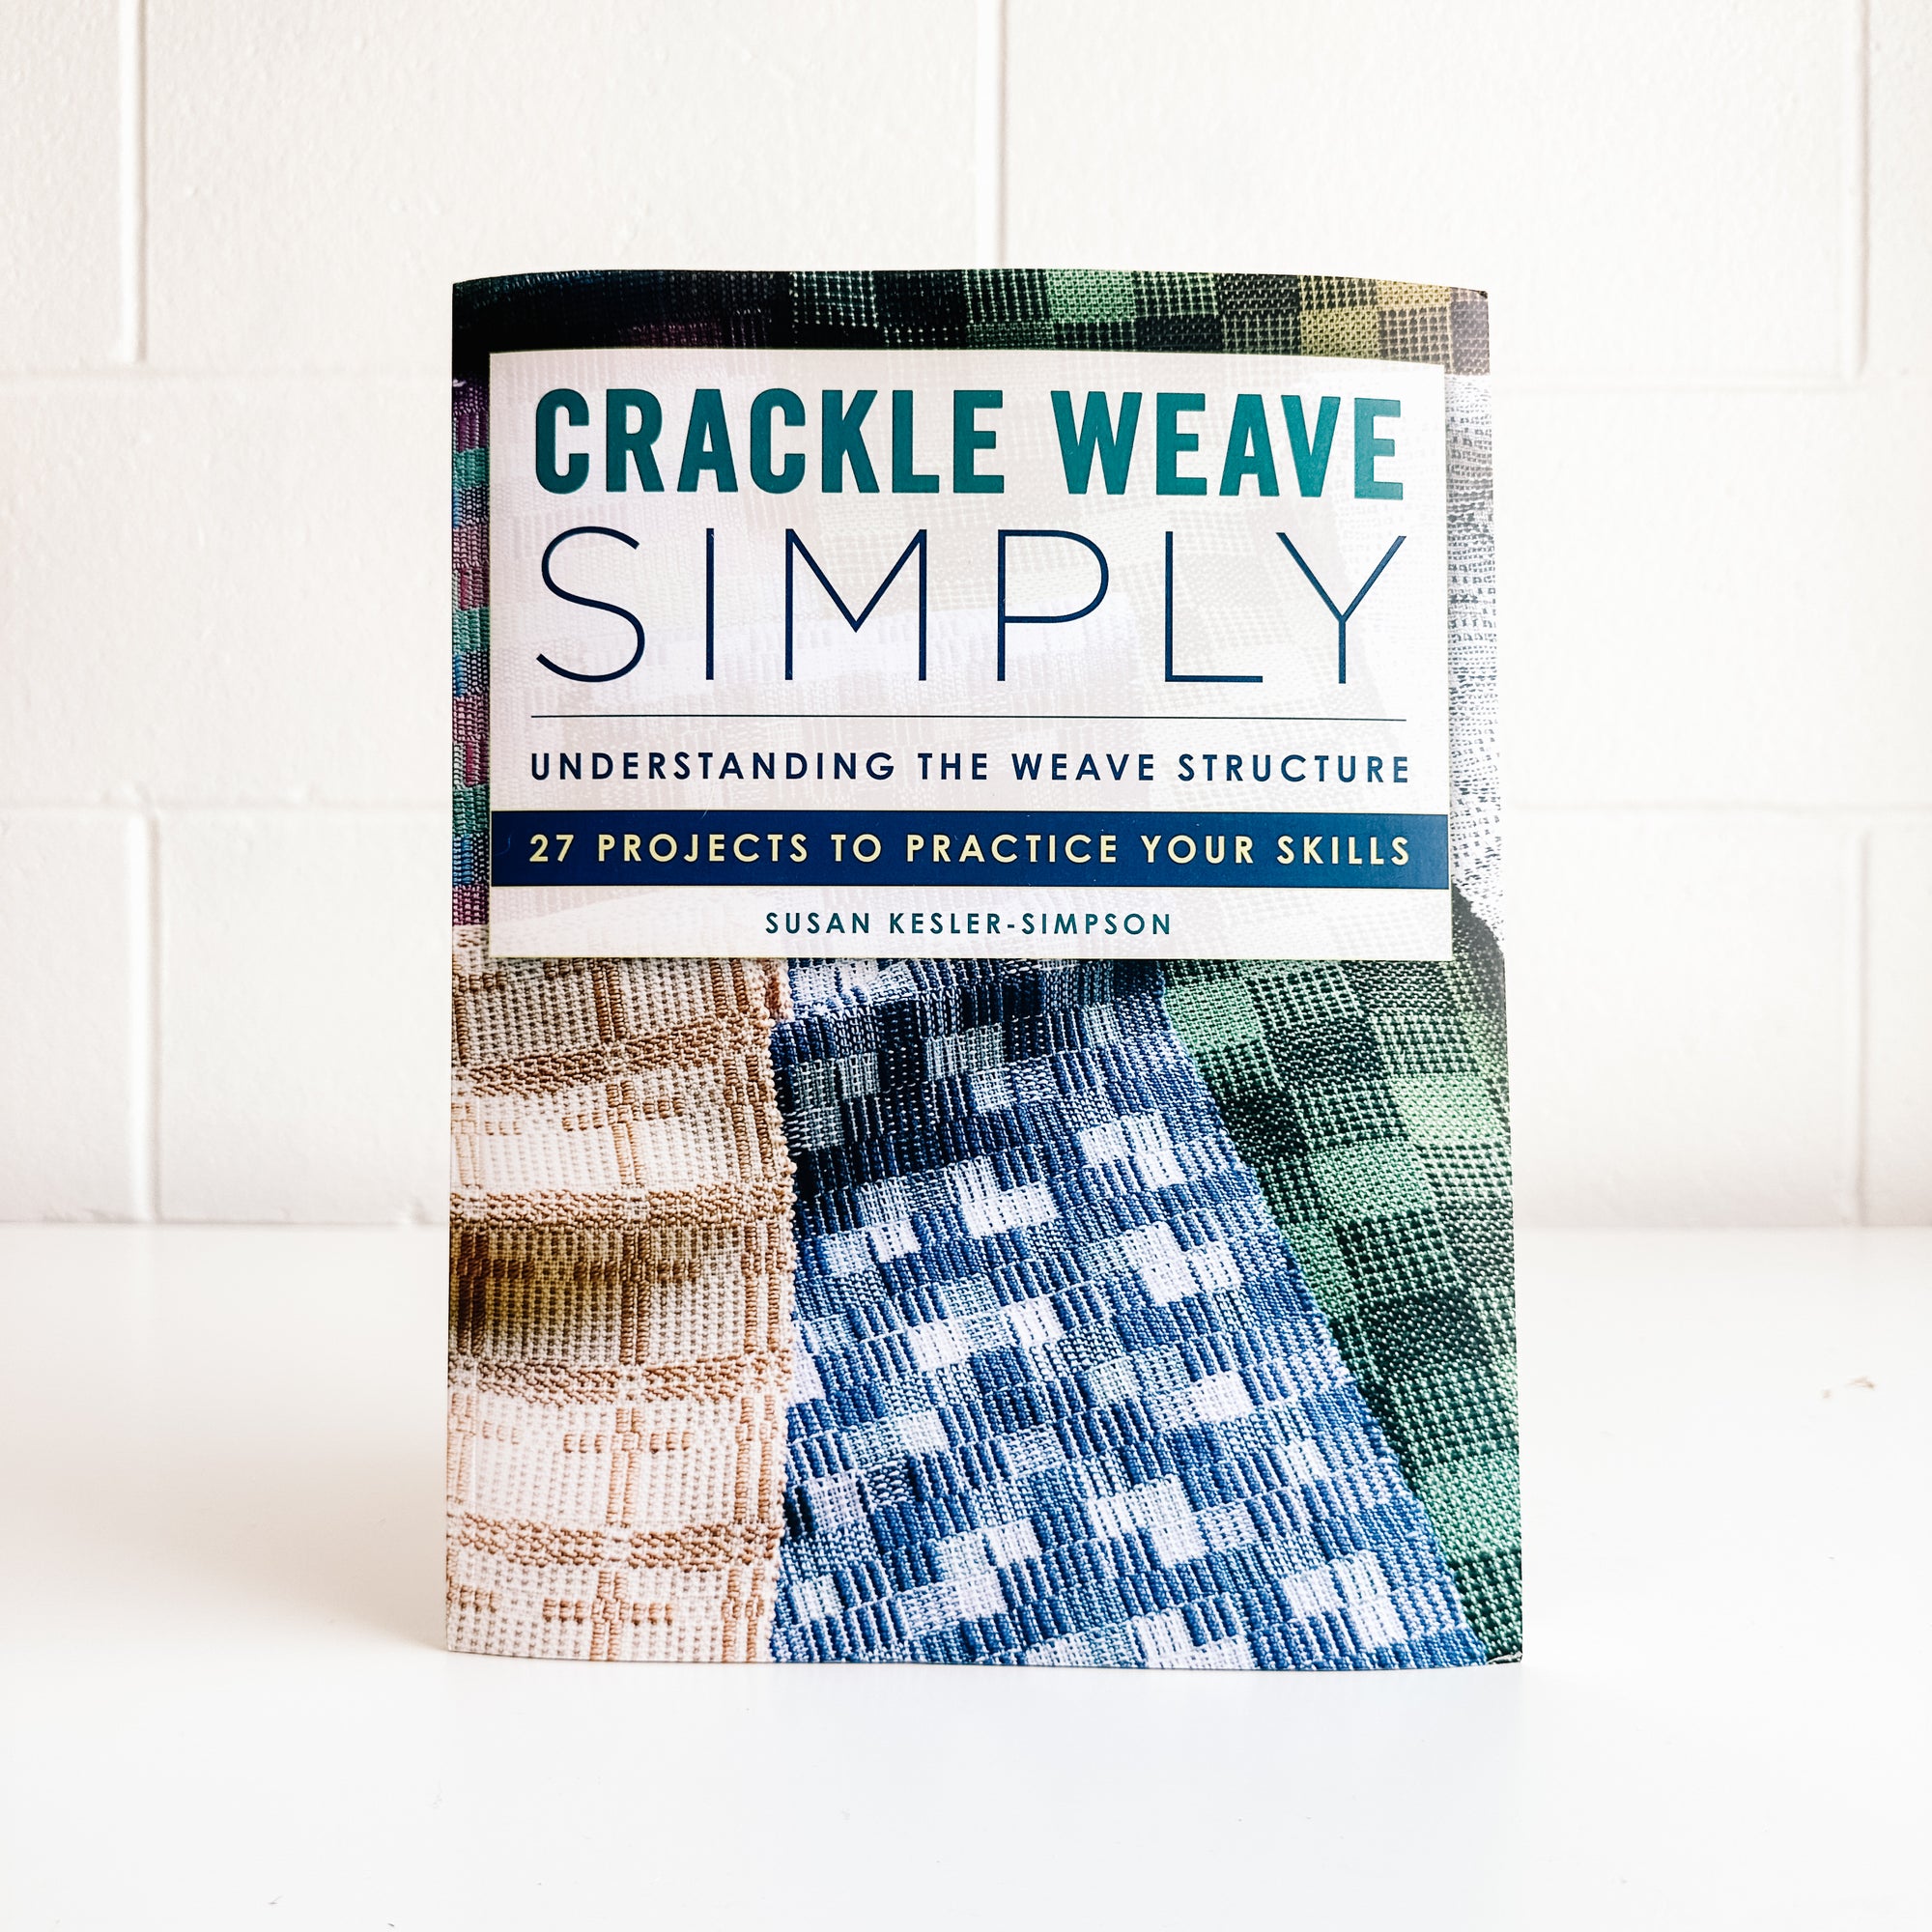 Crackle Weave Simply: Understanding the Weave Structure 27 Projects to Practice Your Skills